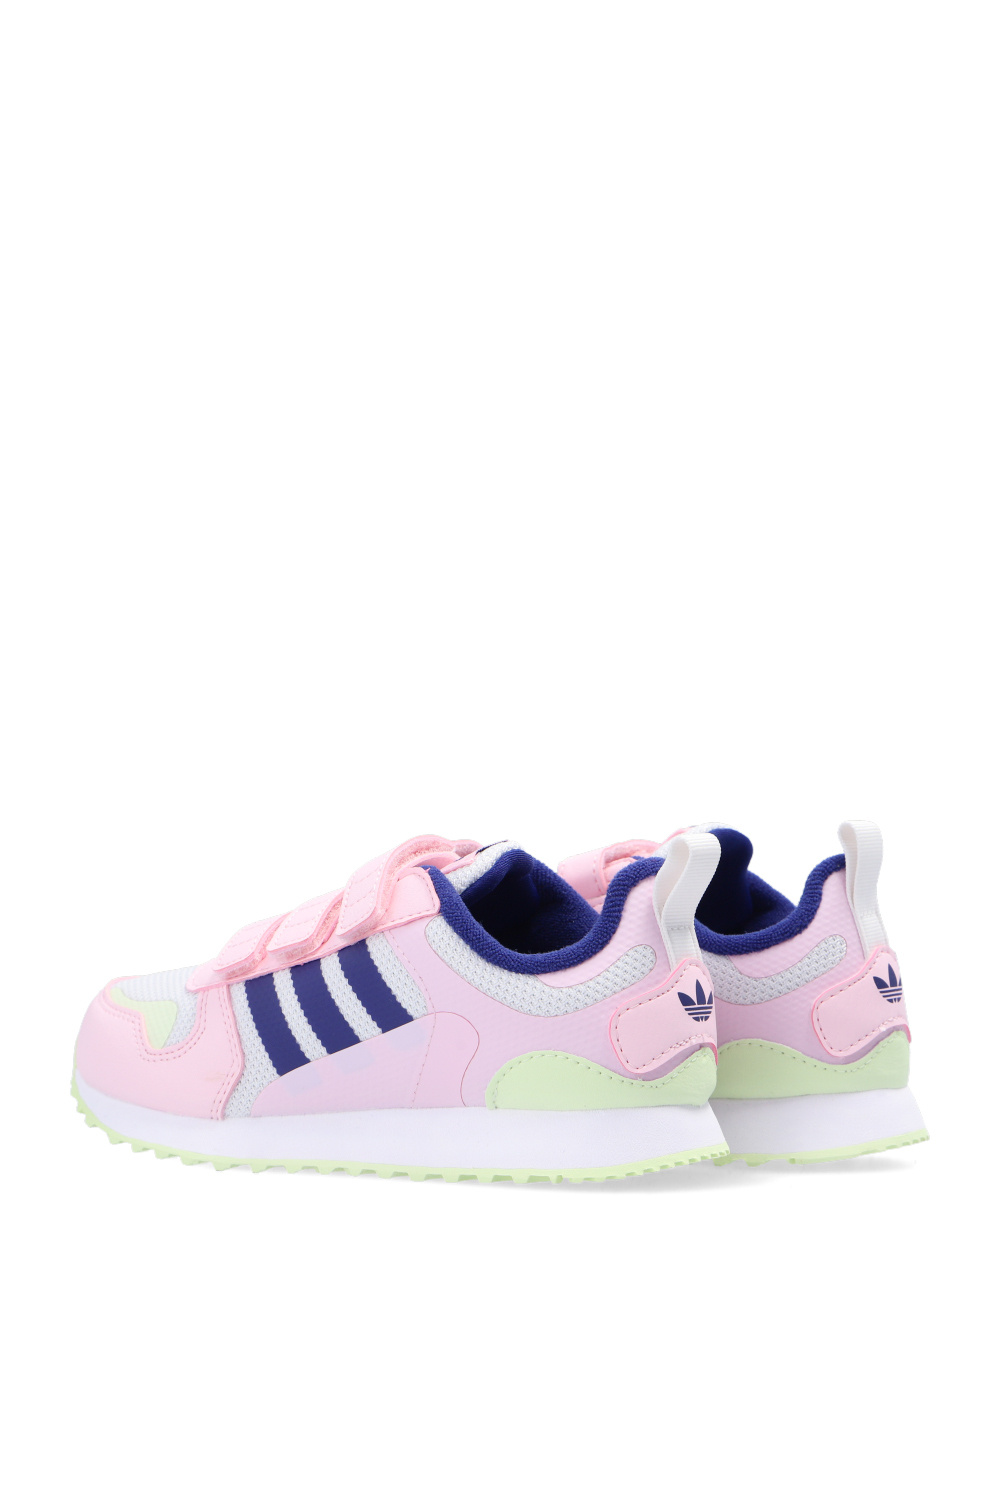 adidas search Kids ‘ZX 700’ sneakers